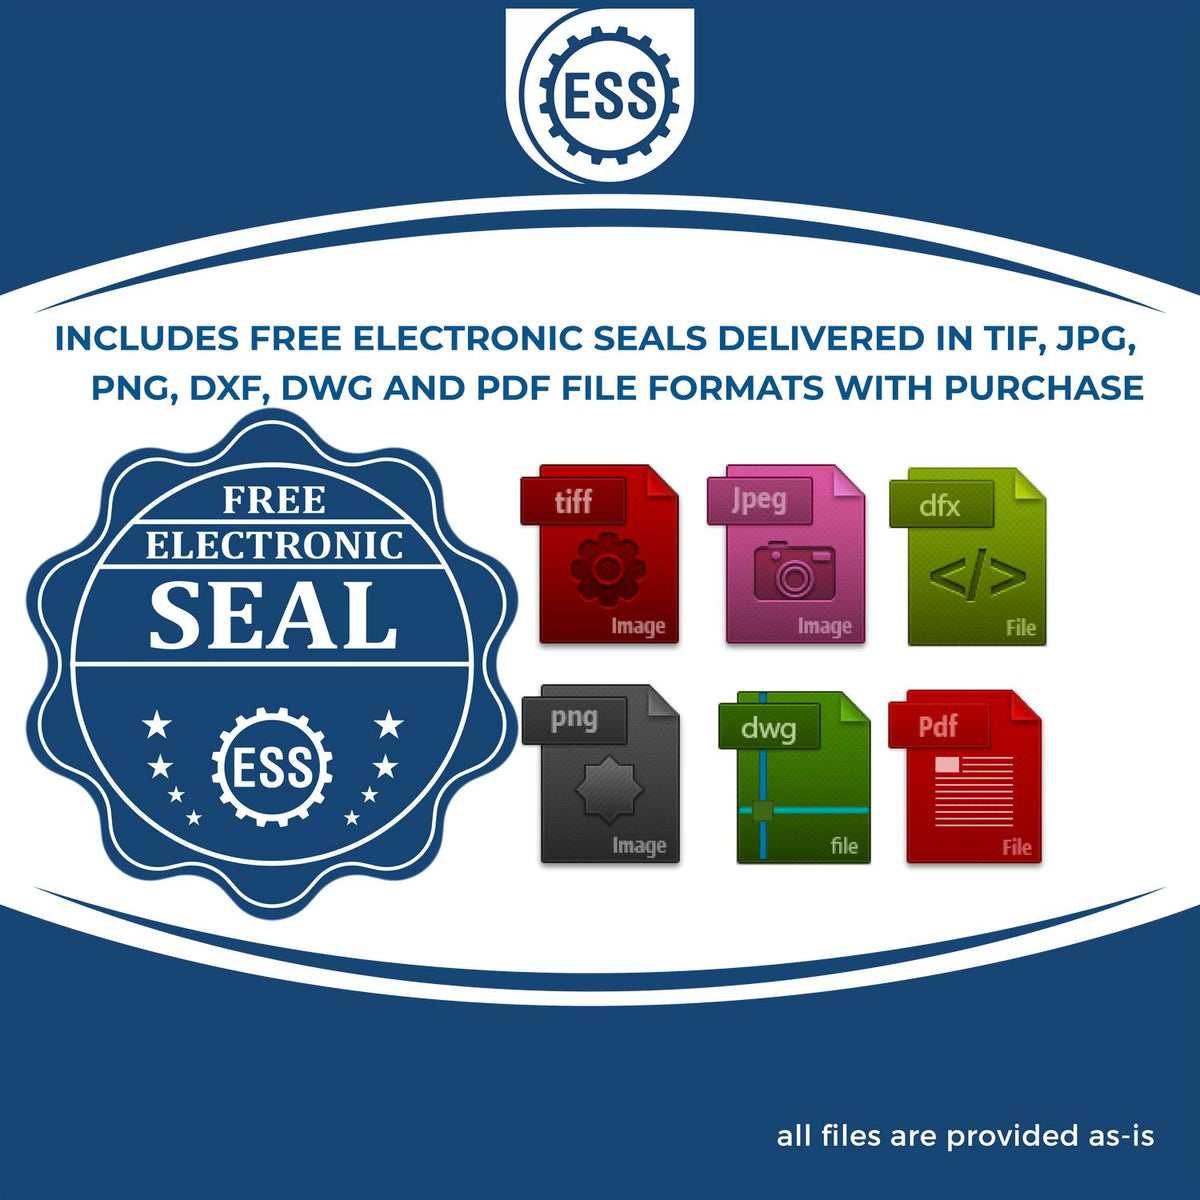 An infographic for the free electronic seal for the Heavy Duty Cast Iron Connecticut Engineer Seal Embosser illustrating the different file type icons such as DXF, DWG, TIF, JPG and PNG.